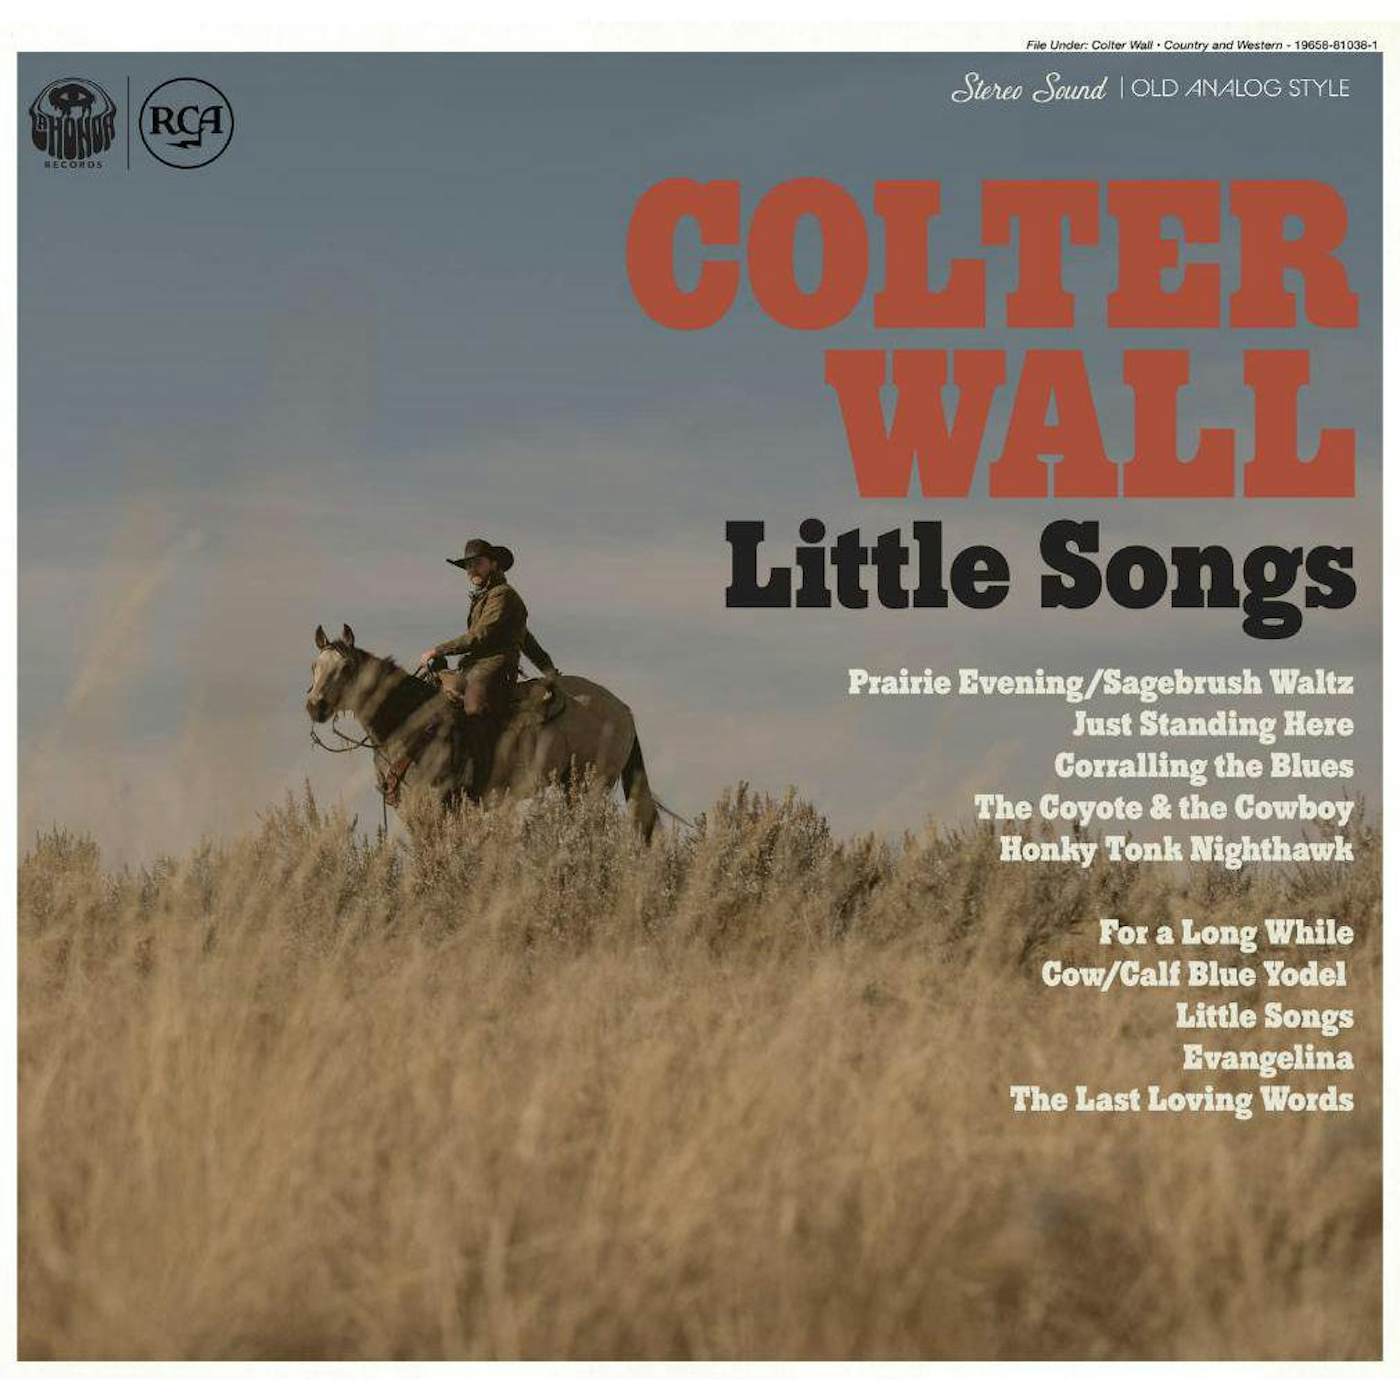 Colter Wall Little Songs Vinyl Record